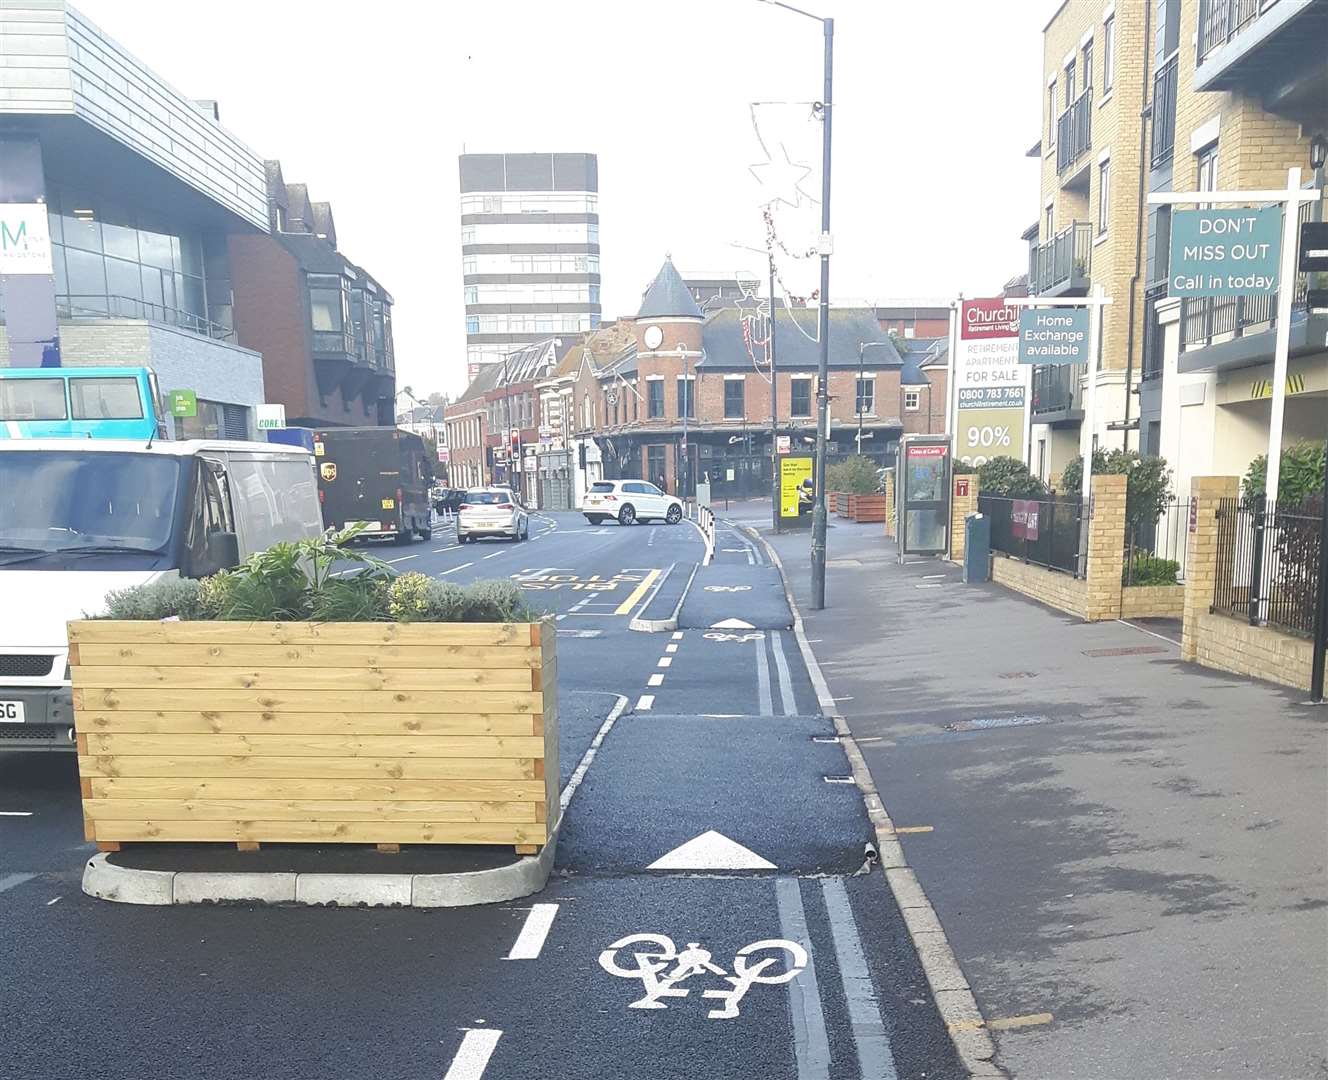 One of the "pop-up" cycle lanes in King Street, Maidstone